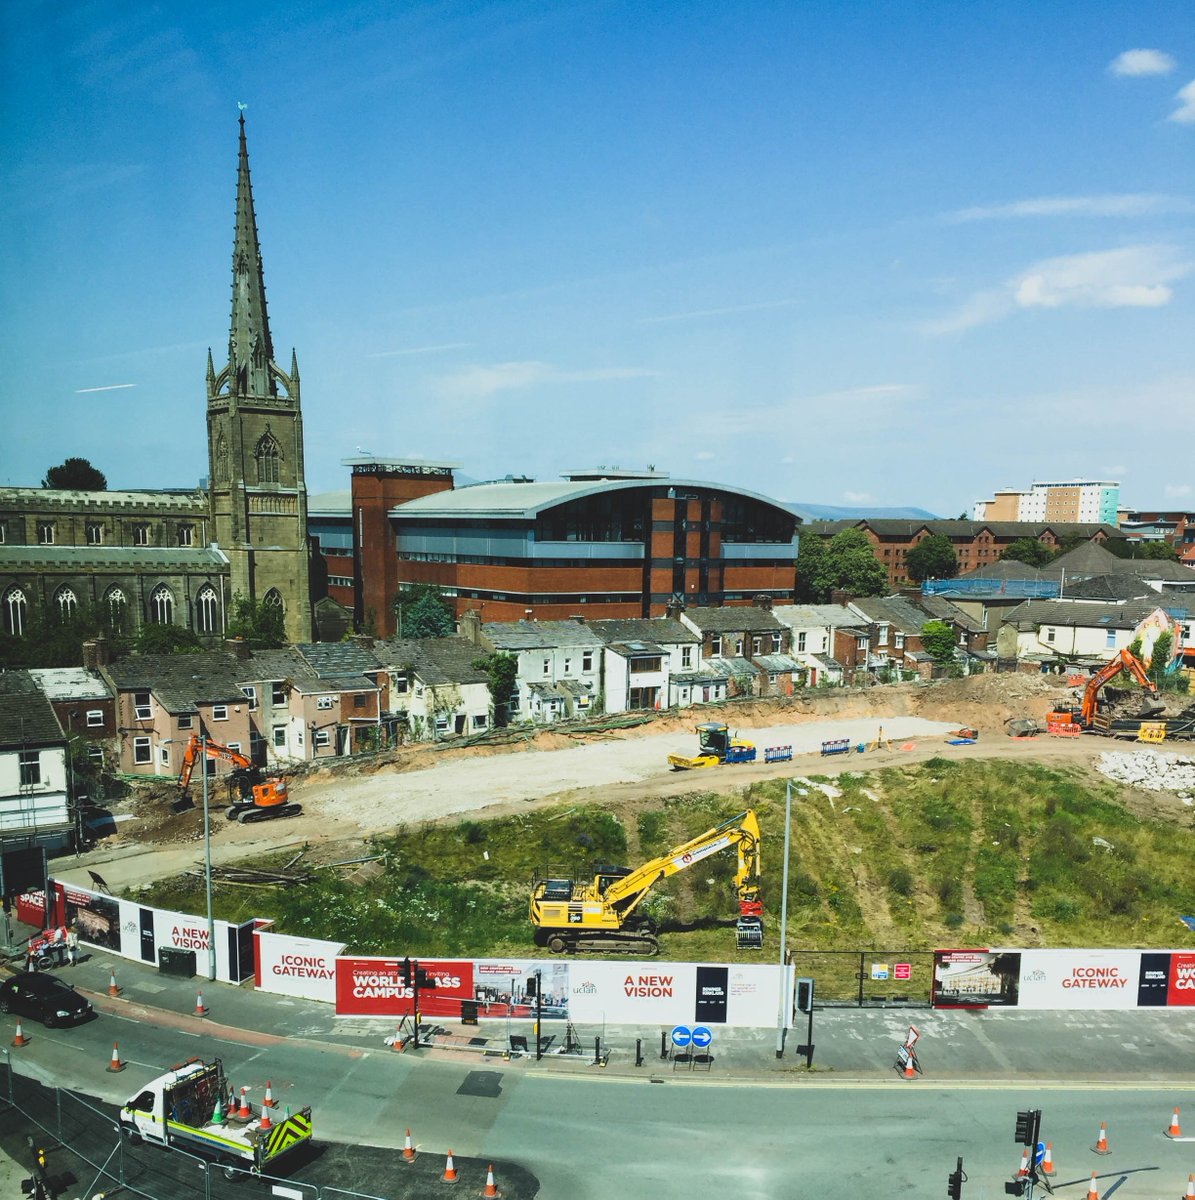 Great view down to @UCLan's @UCLanMasterplan new student centre and square site, where work is well underway to create an iconic gateway connecting the city of #Preston 🚧🏗️🚦

Hoardings looking great too. Designed by yours truly 👀🙌